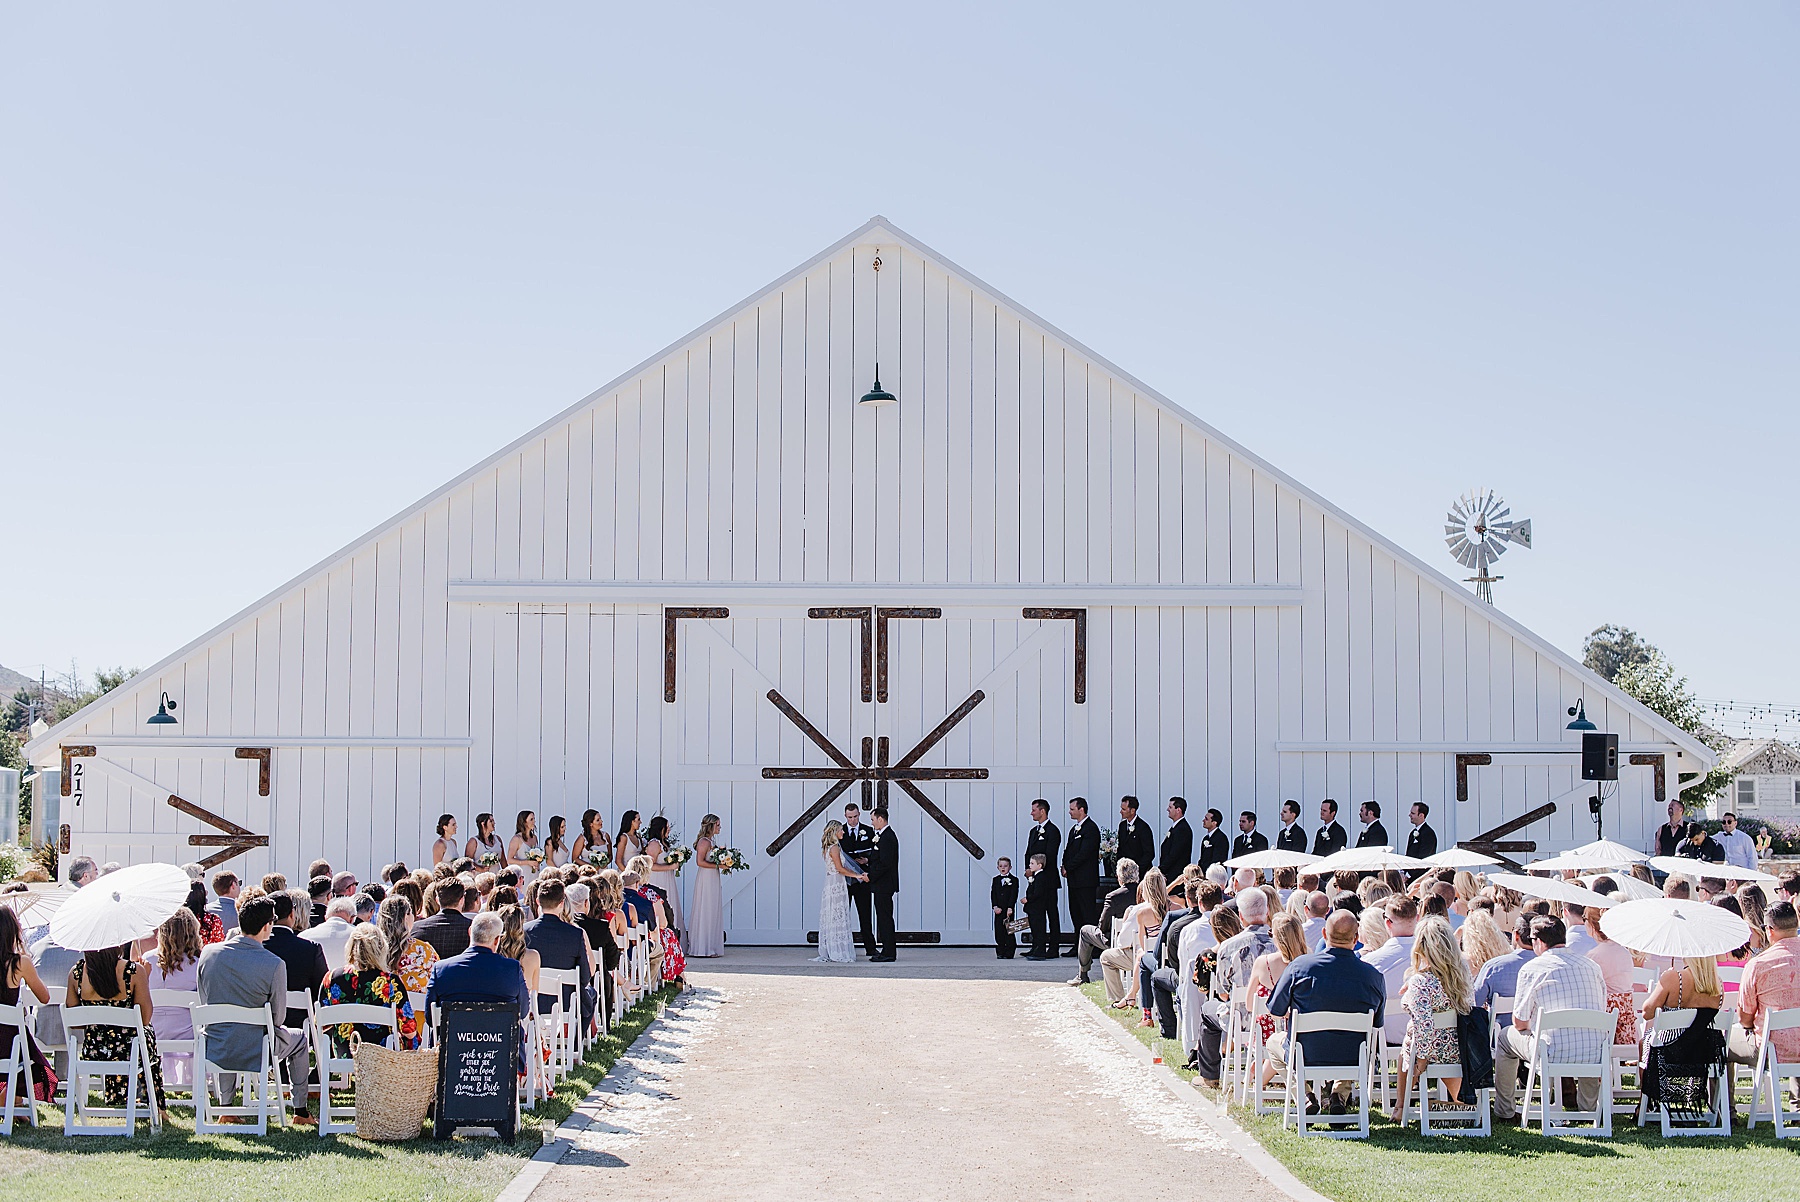 Wedding ceremony in front of a white, rustic barn. Wedding guests are seated. The wedding party is standing on both sides of the bride and groom.